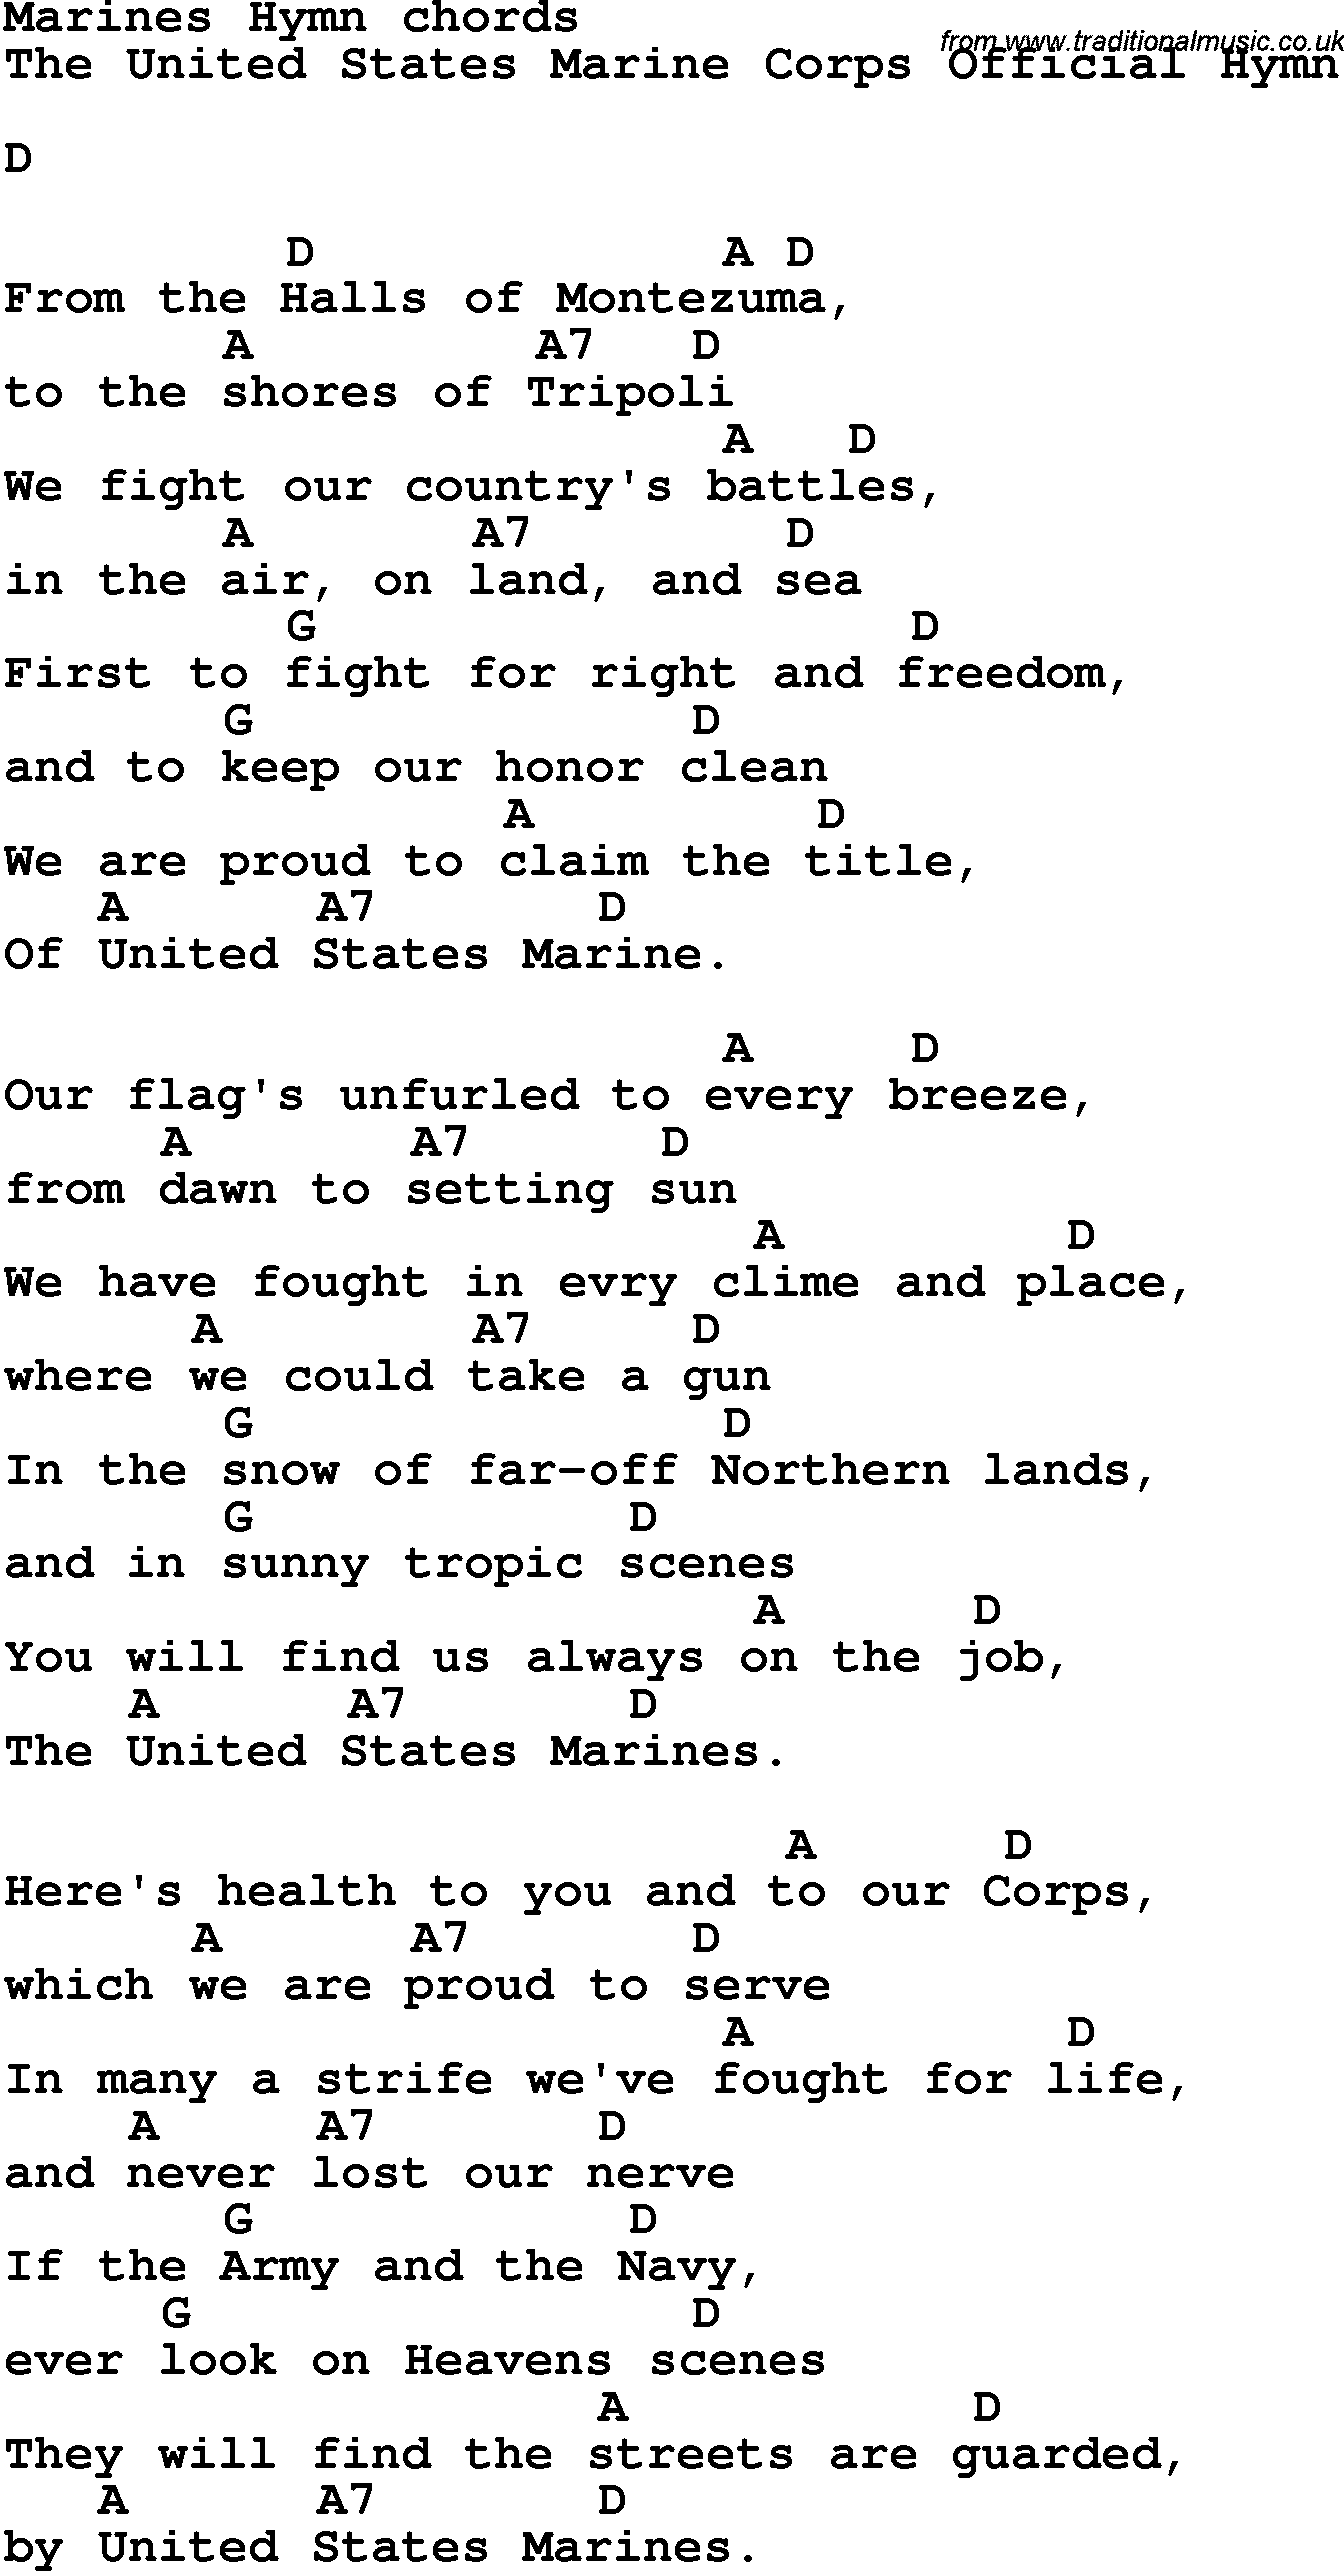 Song Lyrics with guitar chords for Marine's Hymn